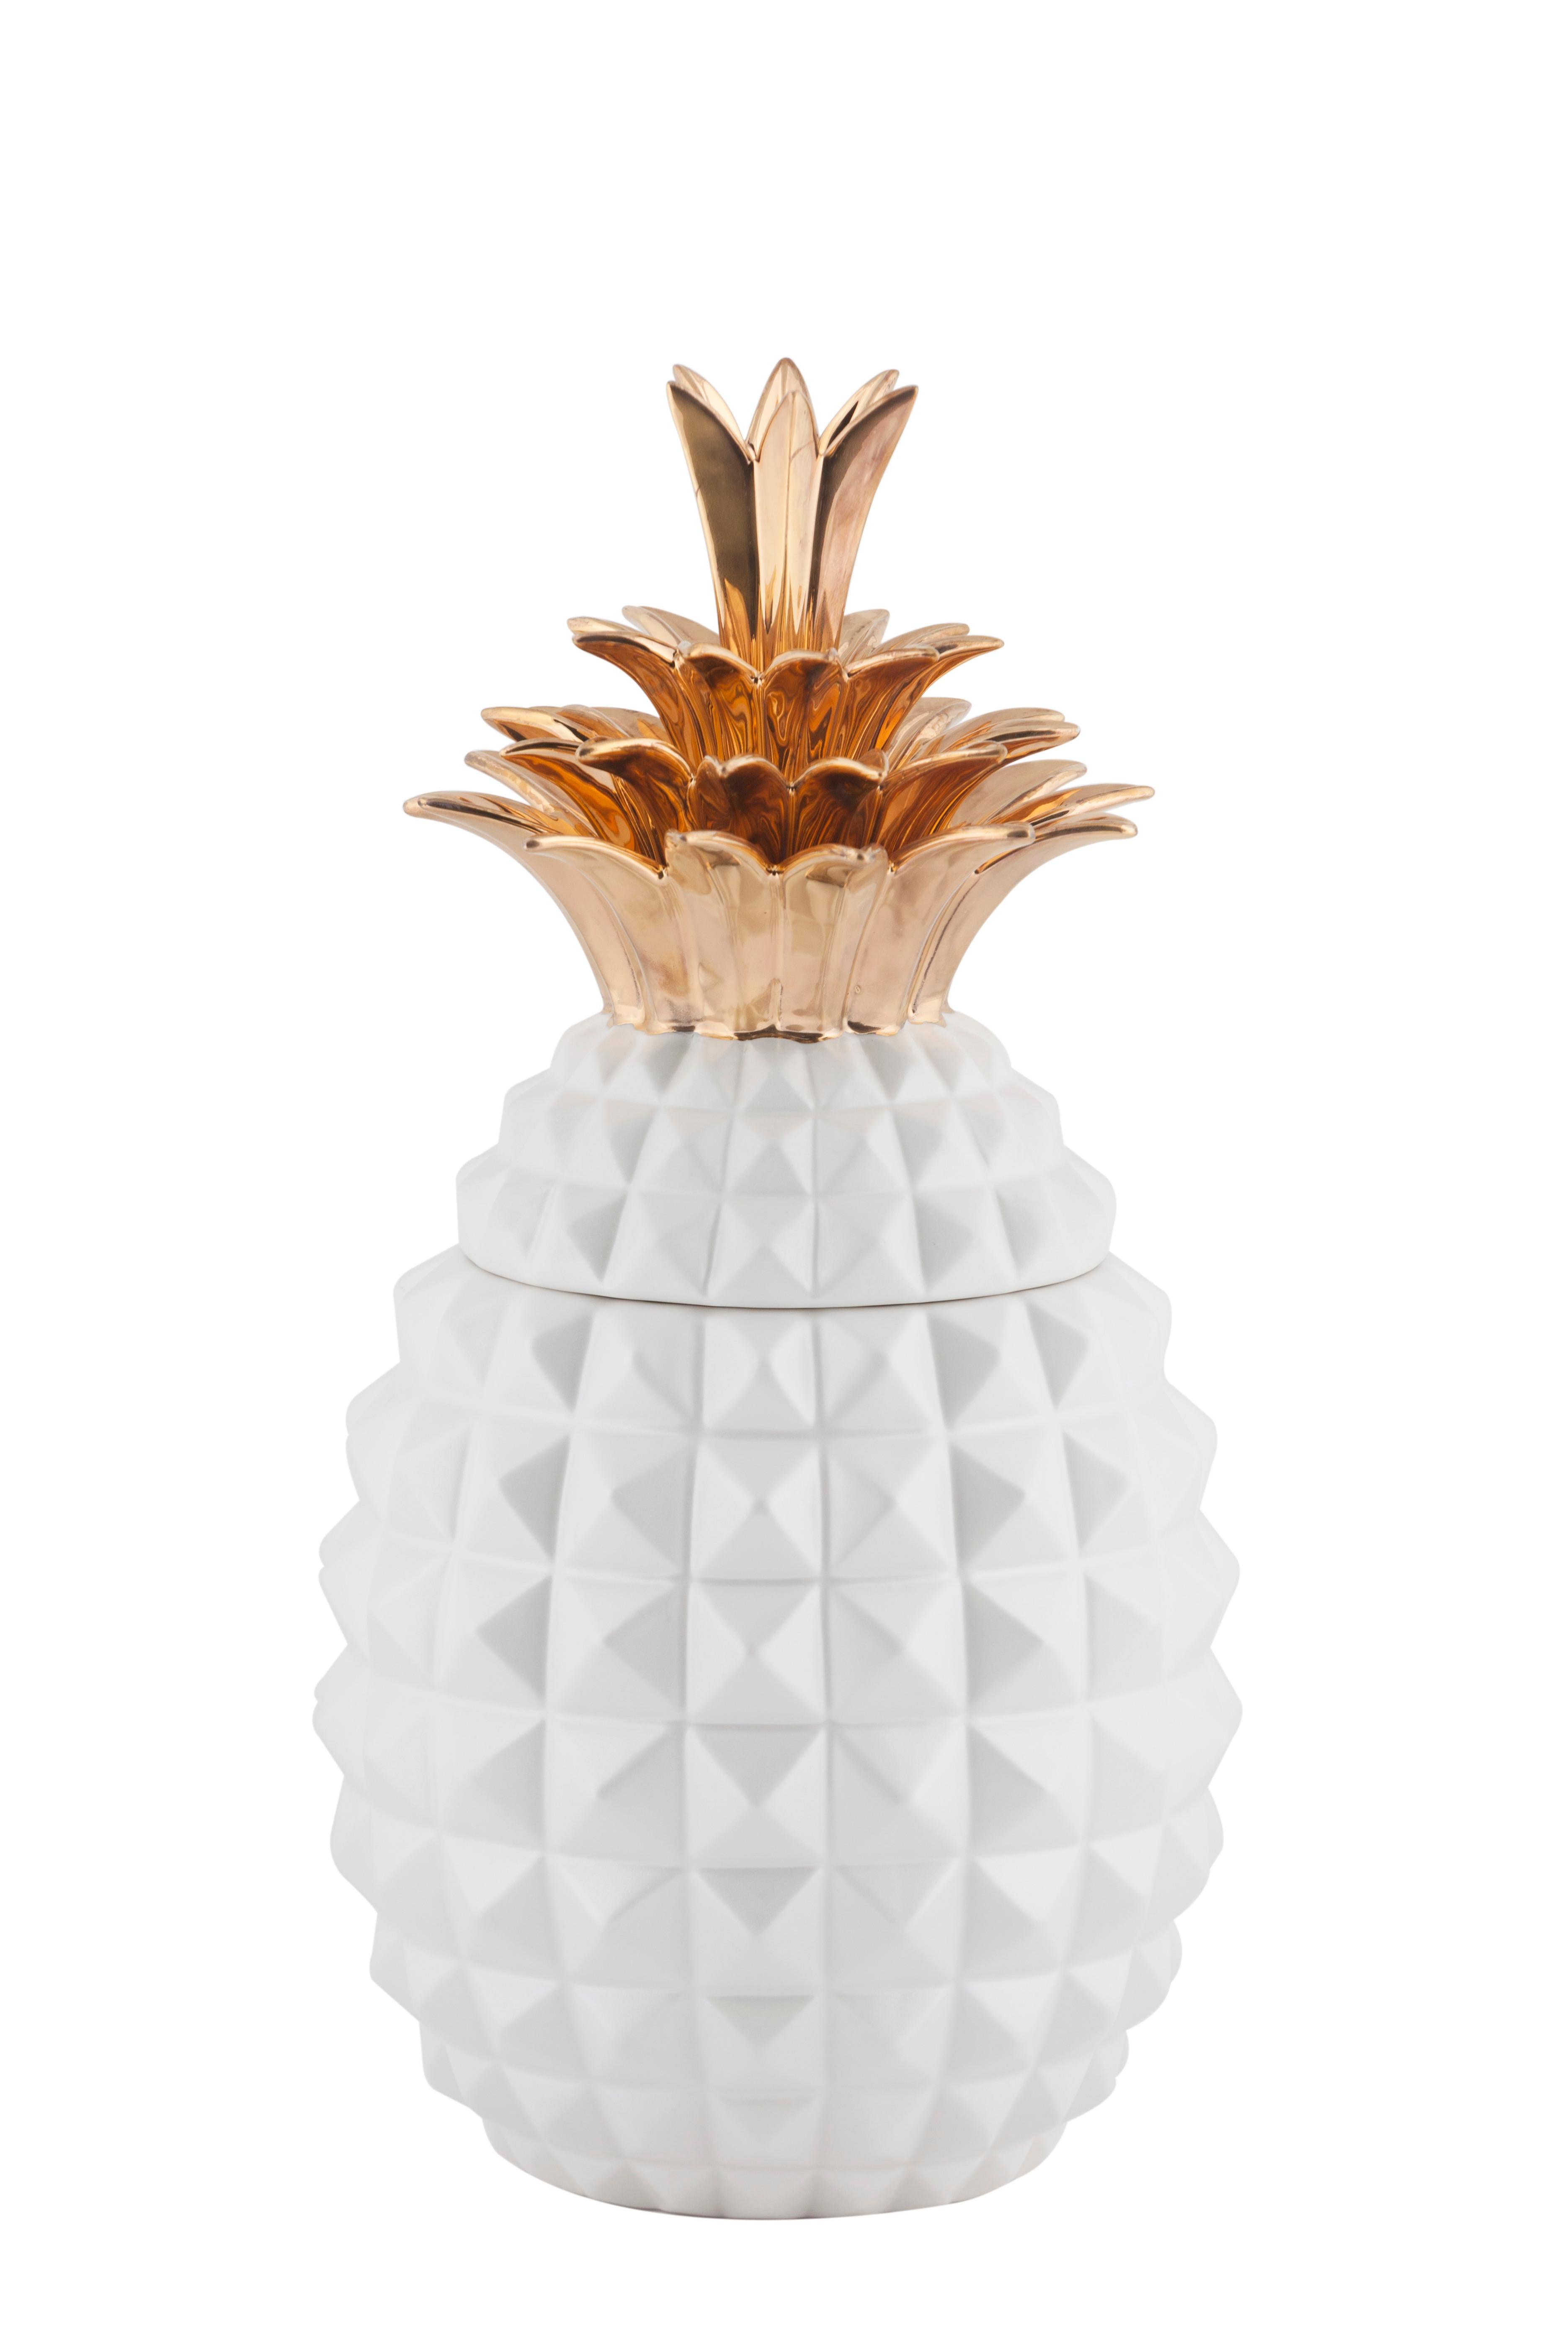 Modern Set/2 Pineapple Ceramic Pots, White, Handmade in Portugal by Lusitanus Home For Sale